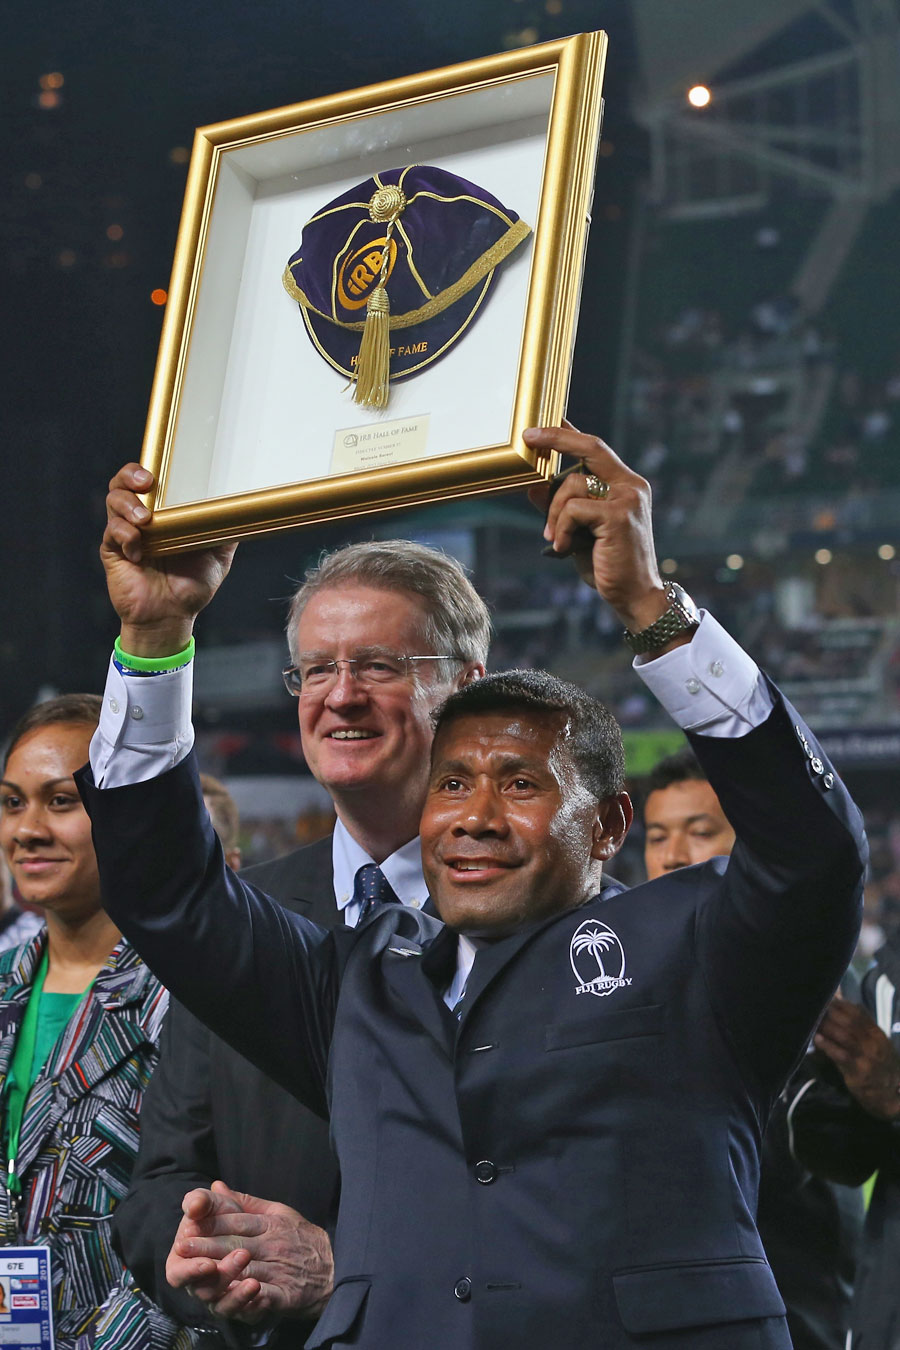 Former Fiji star Waisale Serevi is inducted into the IRB Hall of Fame